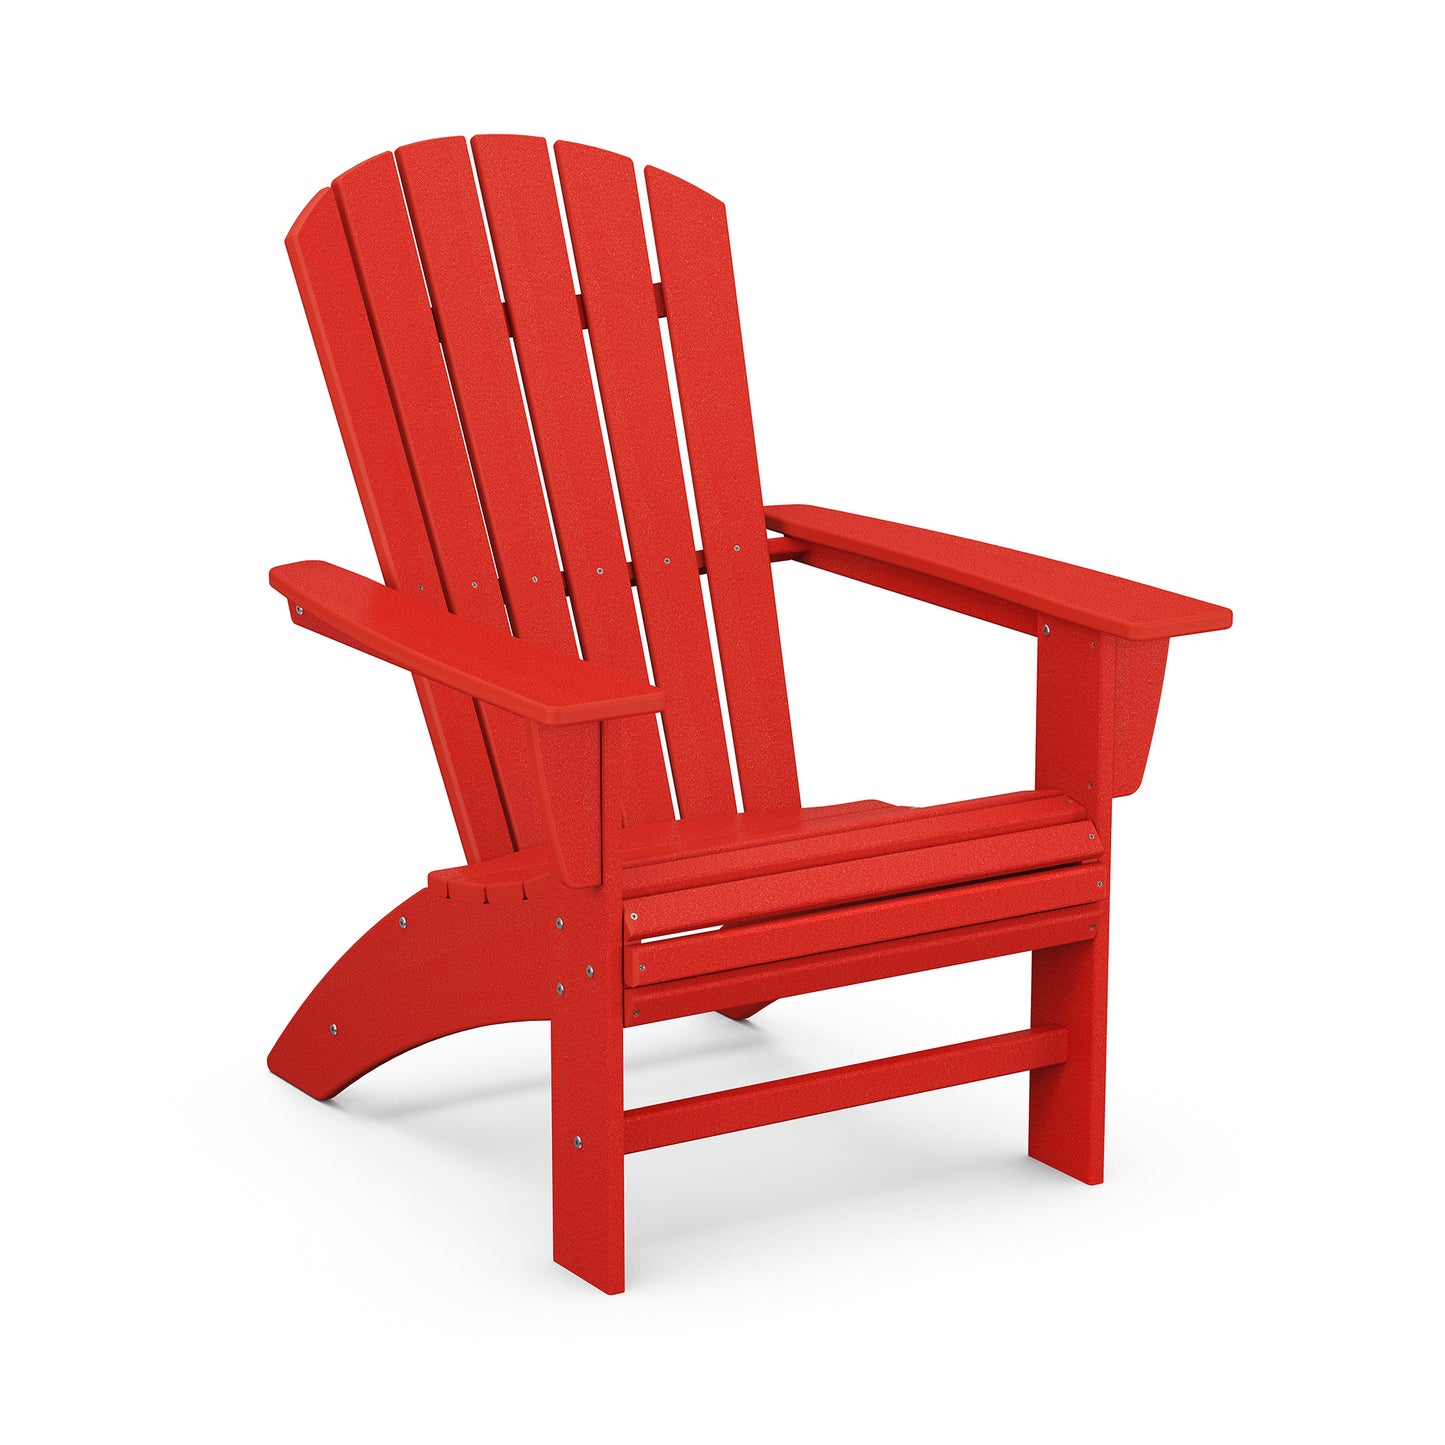 A vibrant red, eco-friendly POLYWOOD Nautical Curveback Adirondack chair made of POLYWOOD® lumber, featuring a slatted design with wide armrests, set against a plain white background.